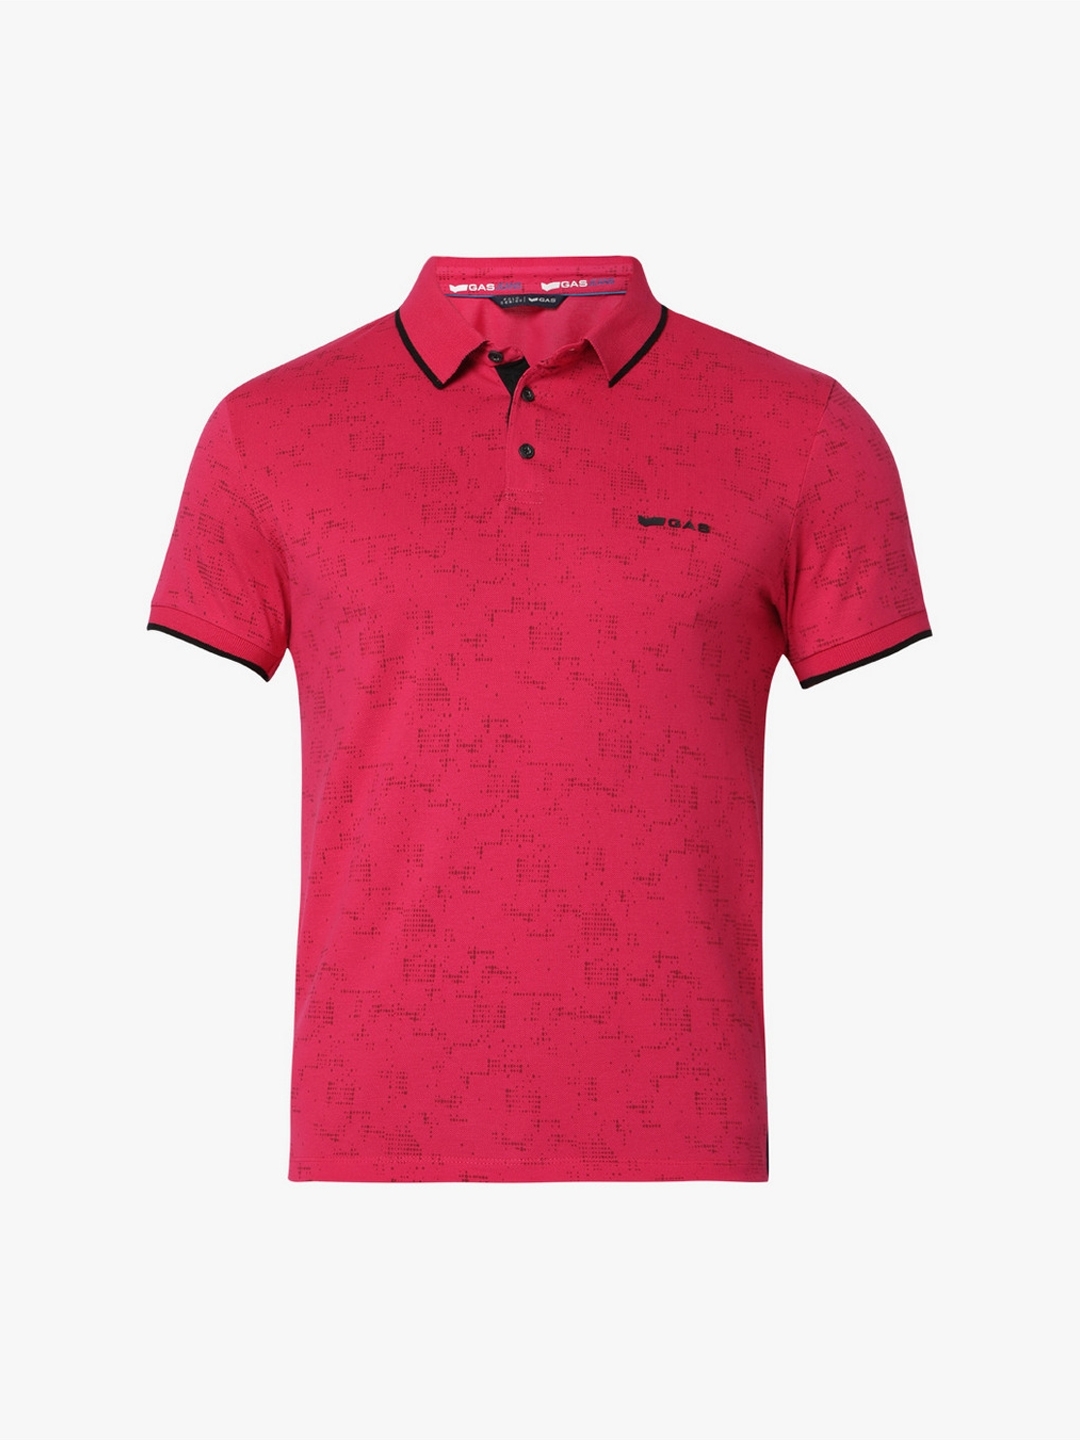 men's under armour pink polo - OFF-60% >Free Delivery